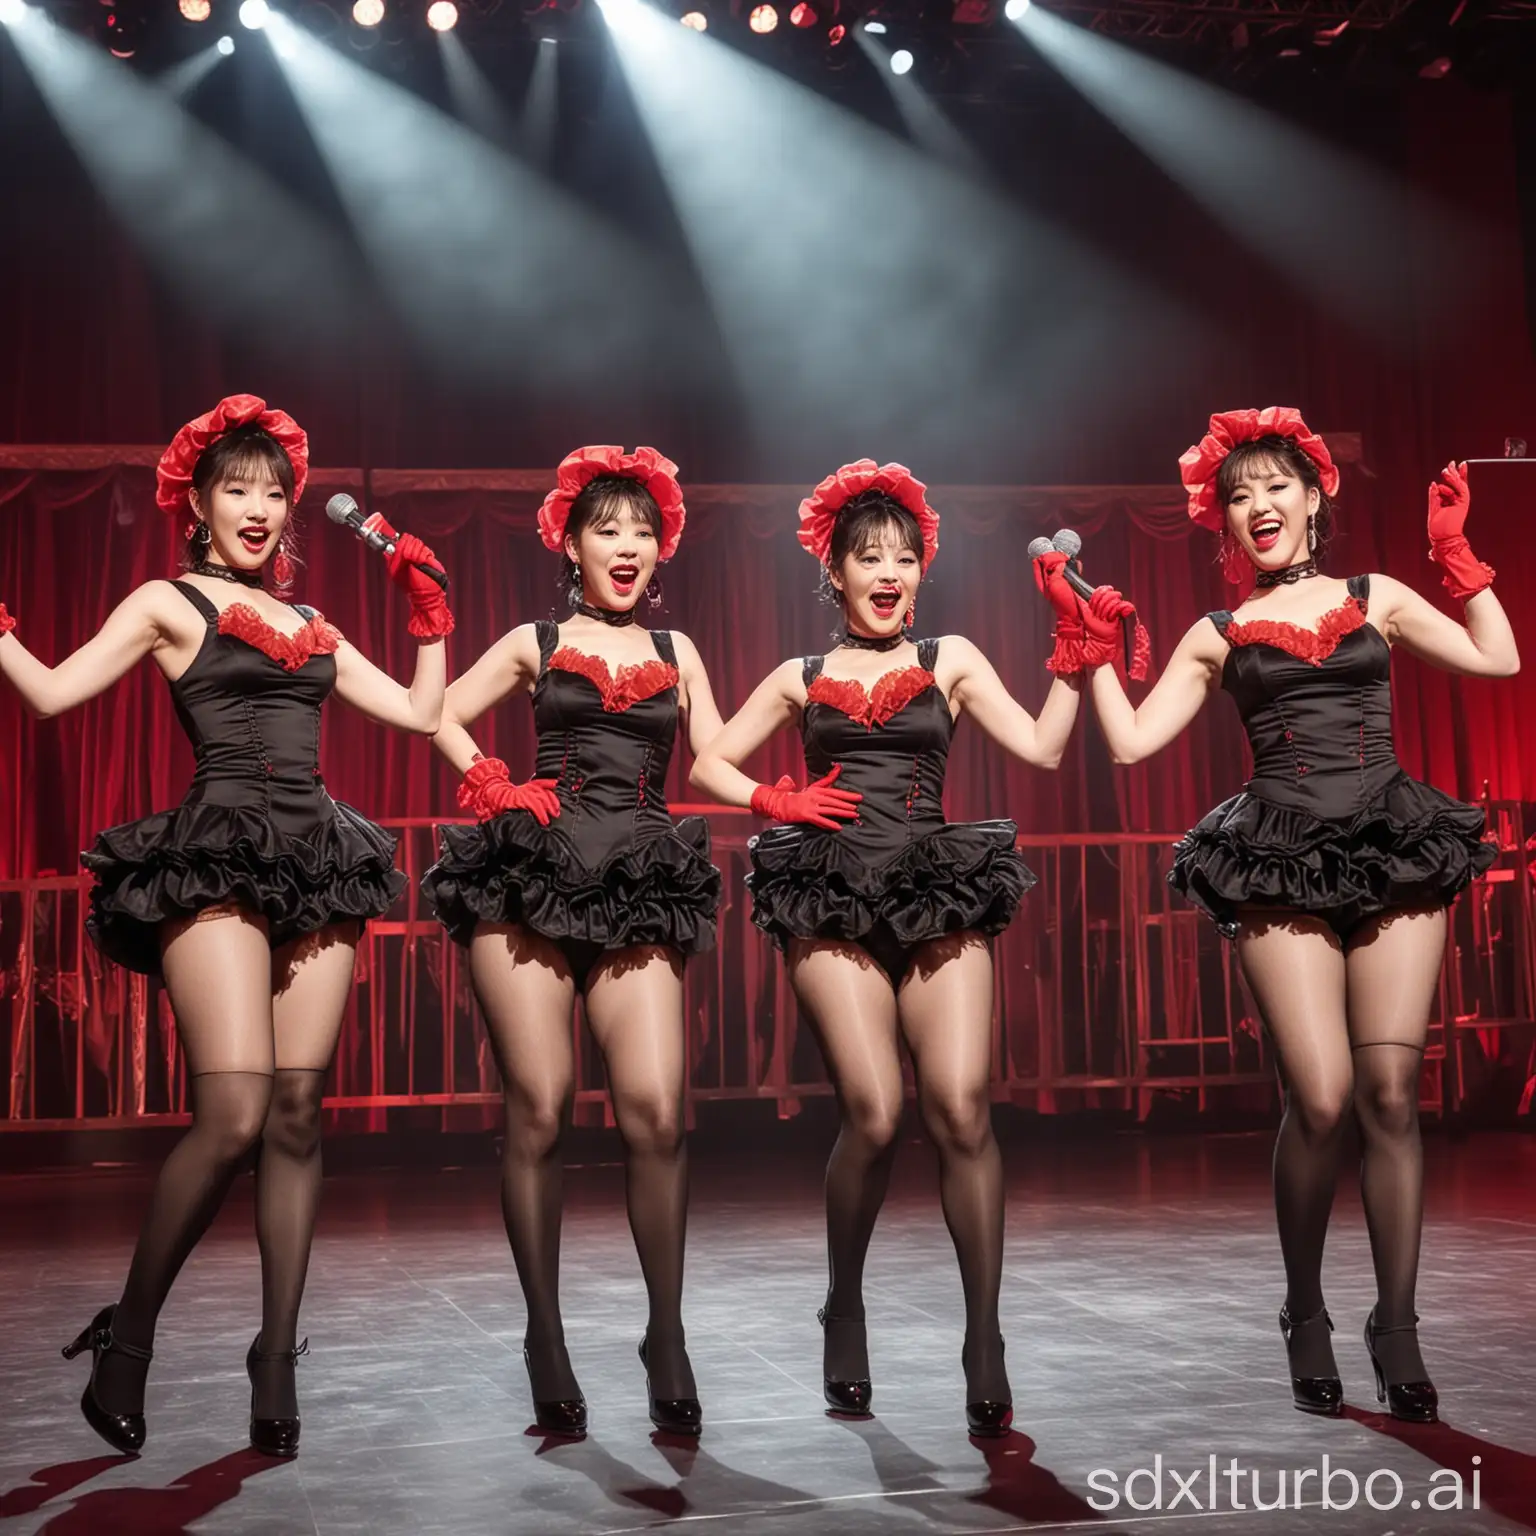 Female-Kpop-Group-CanCan-Performance-with-Red-Gloves-and-Microphones-on-Stage